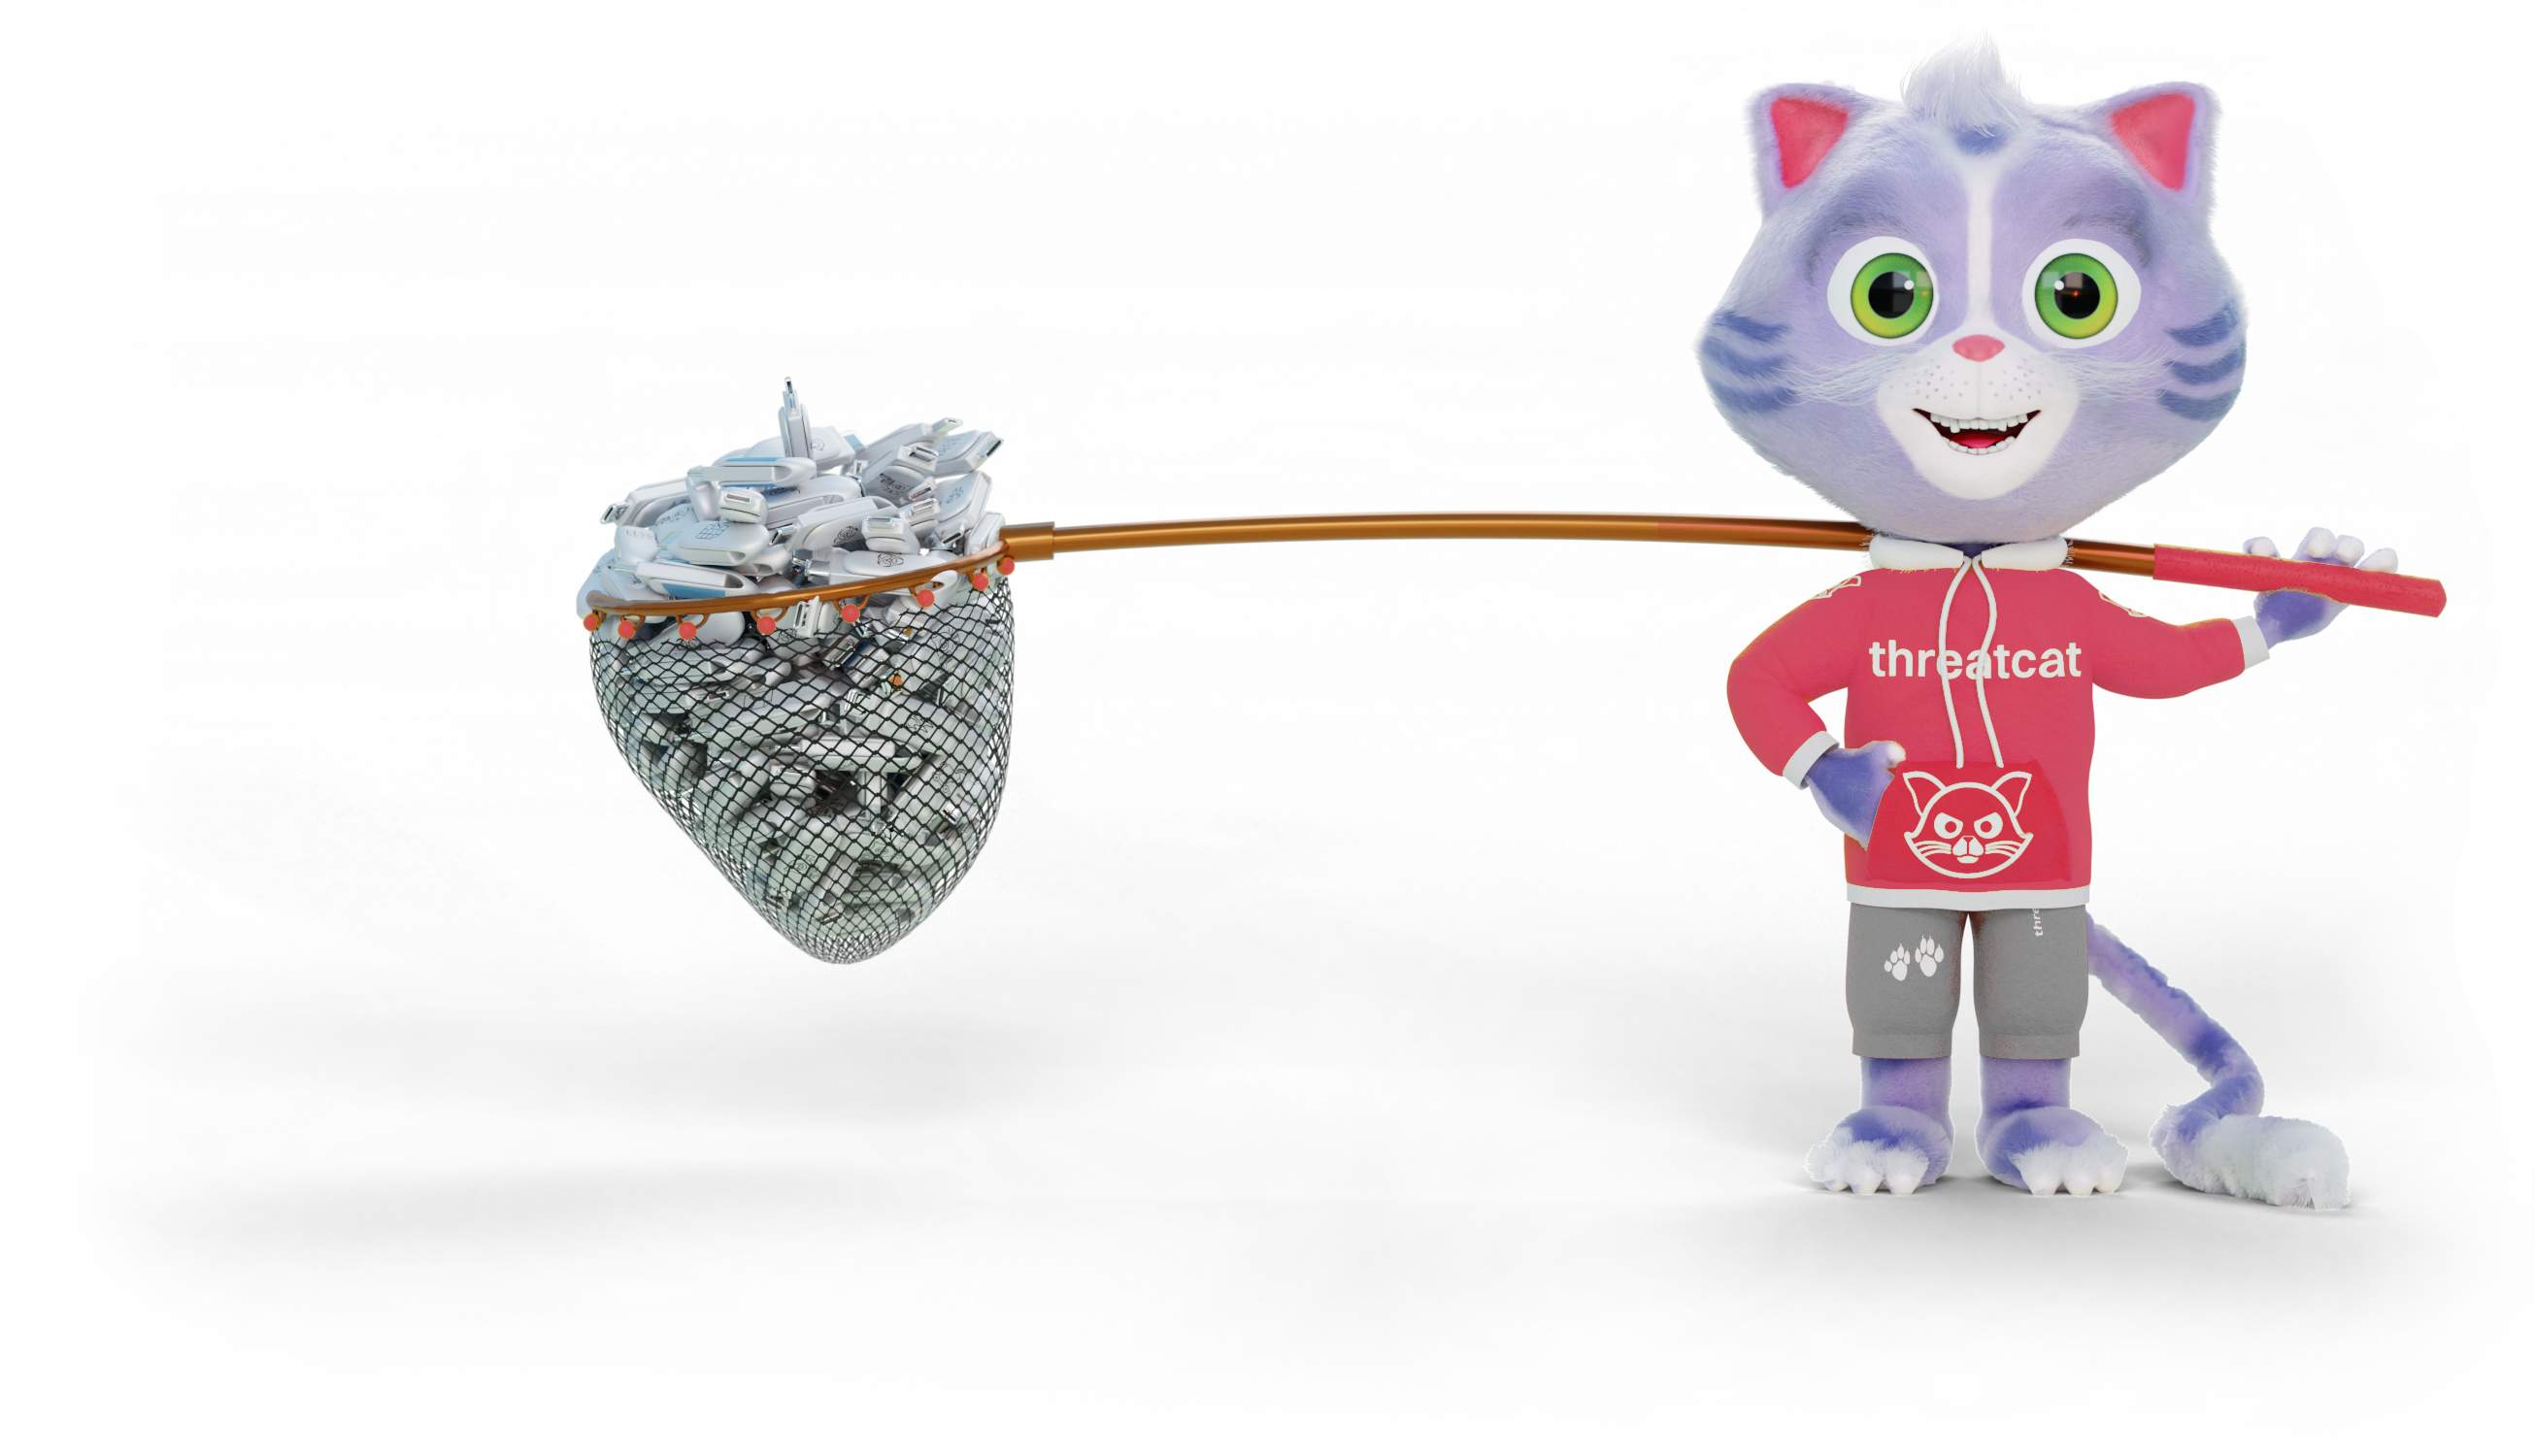 the threatcat holding a landing net filled with USB sticks